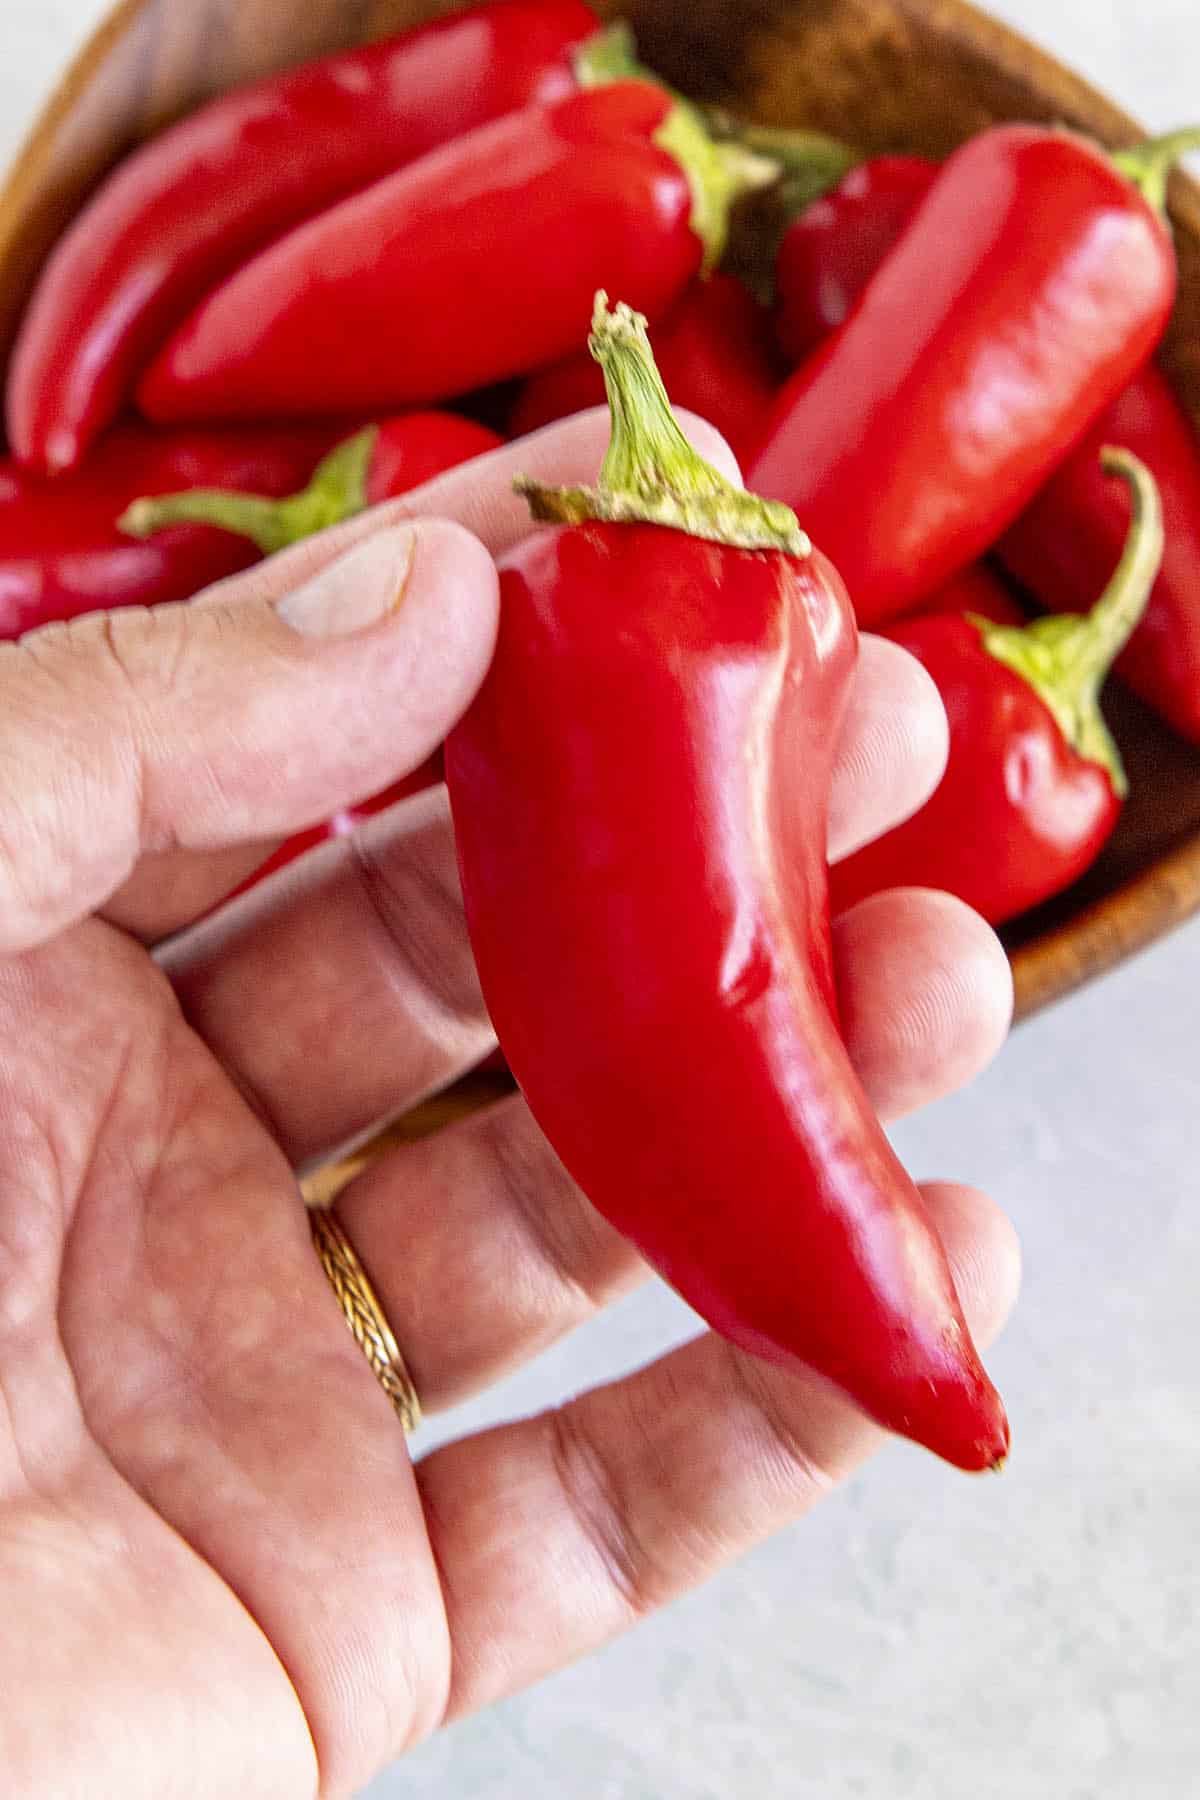 Mike holding a Fresno Pepper in his hand